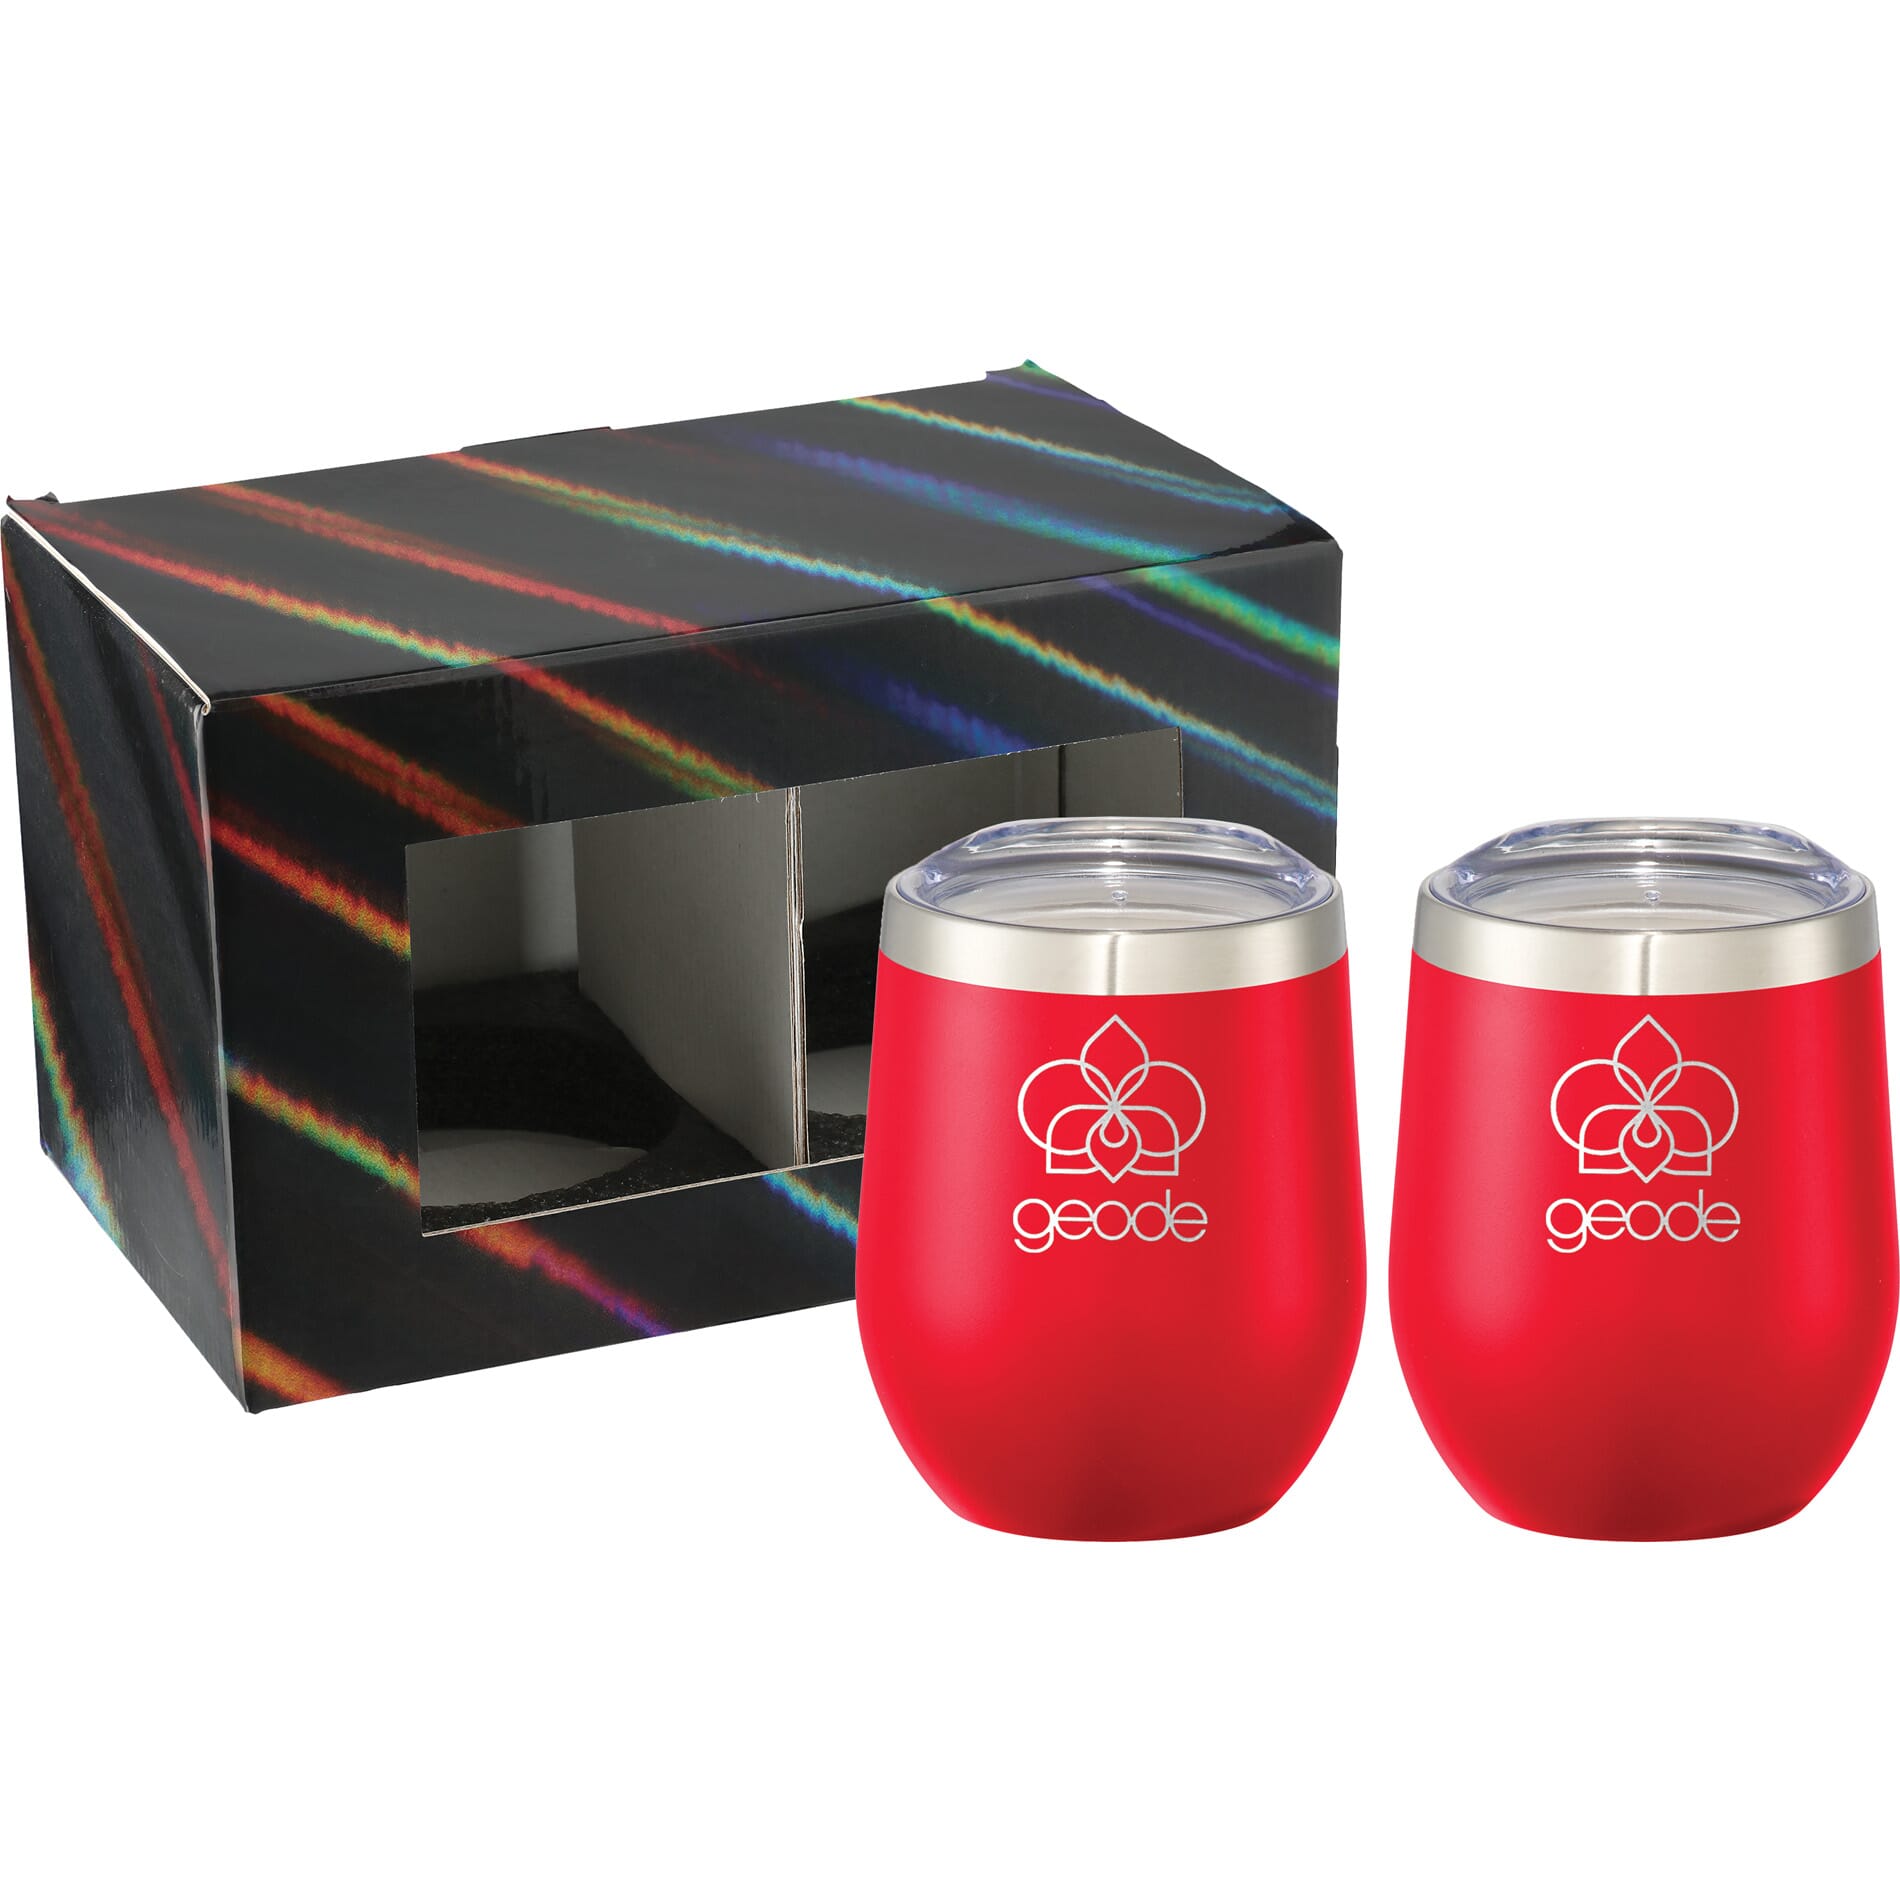 12 oz Corzo Cup 2 in 1 Gift Set